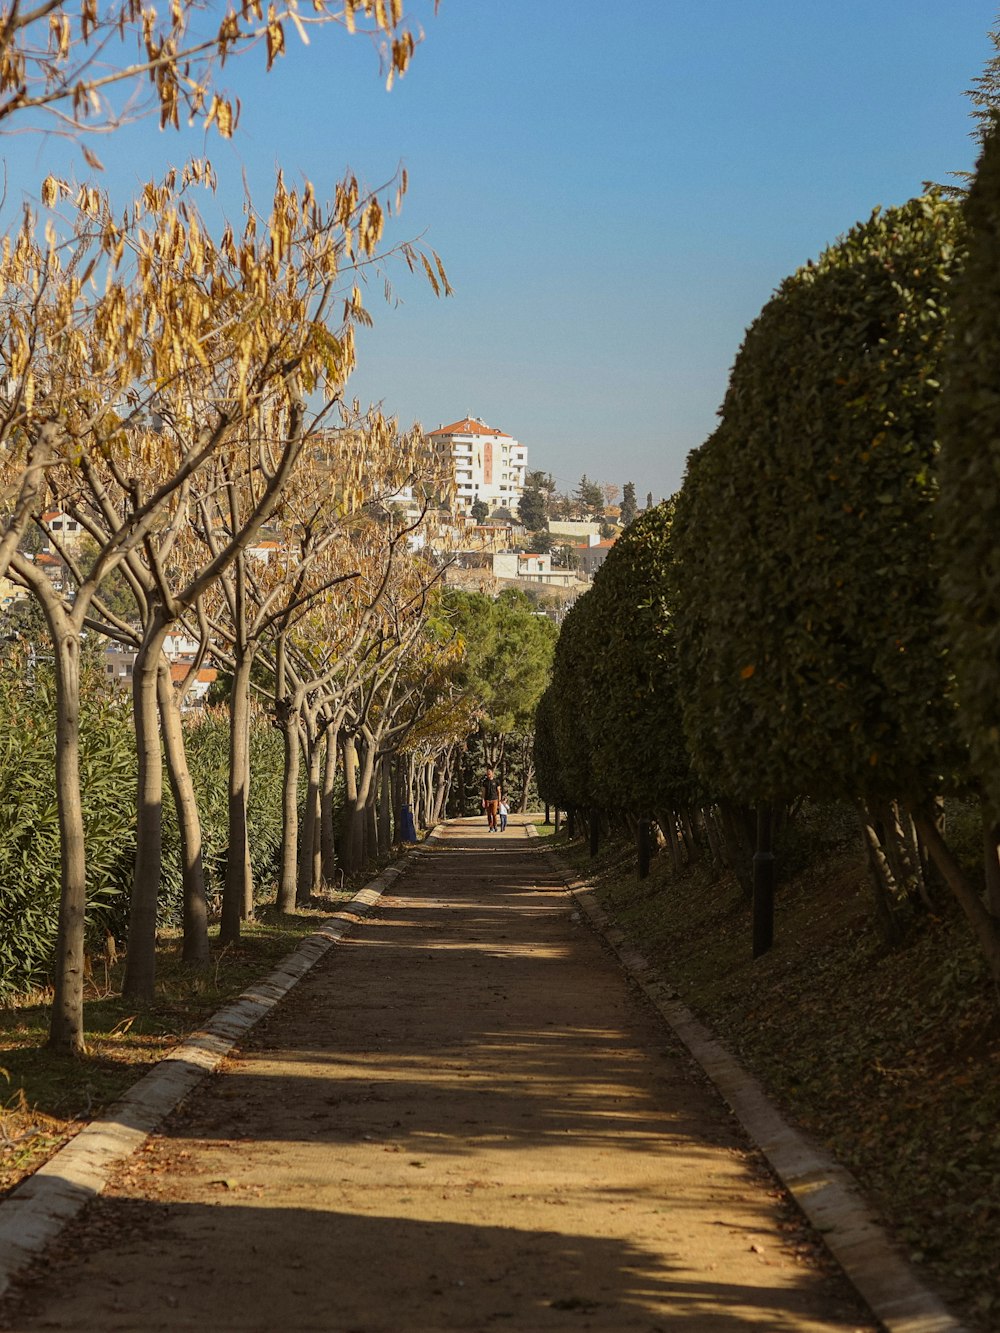 a street lined with lots of trees and bushes